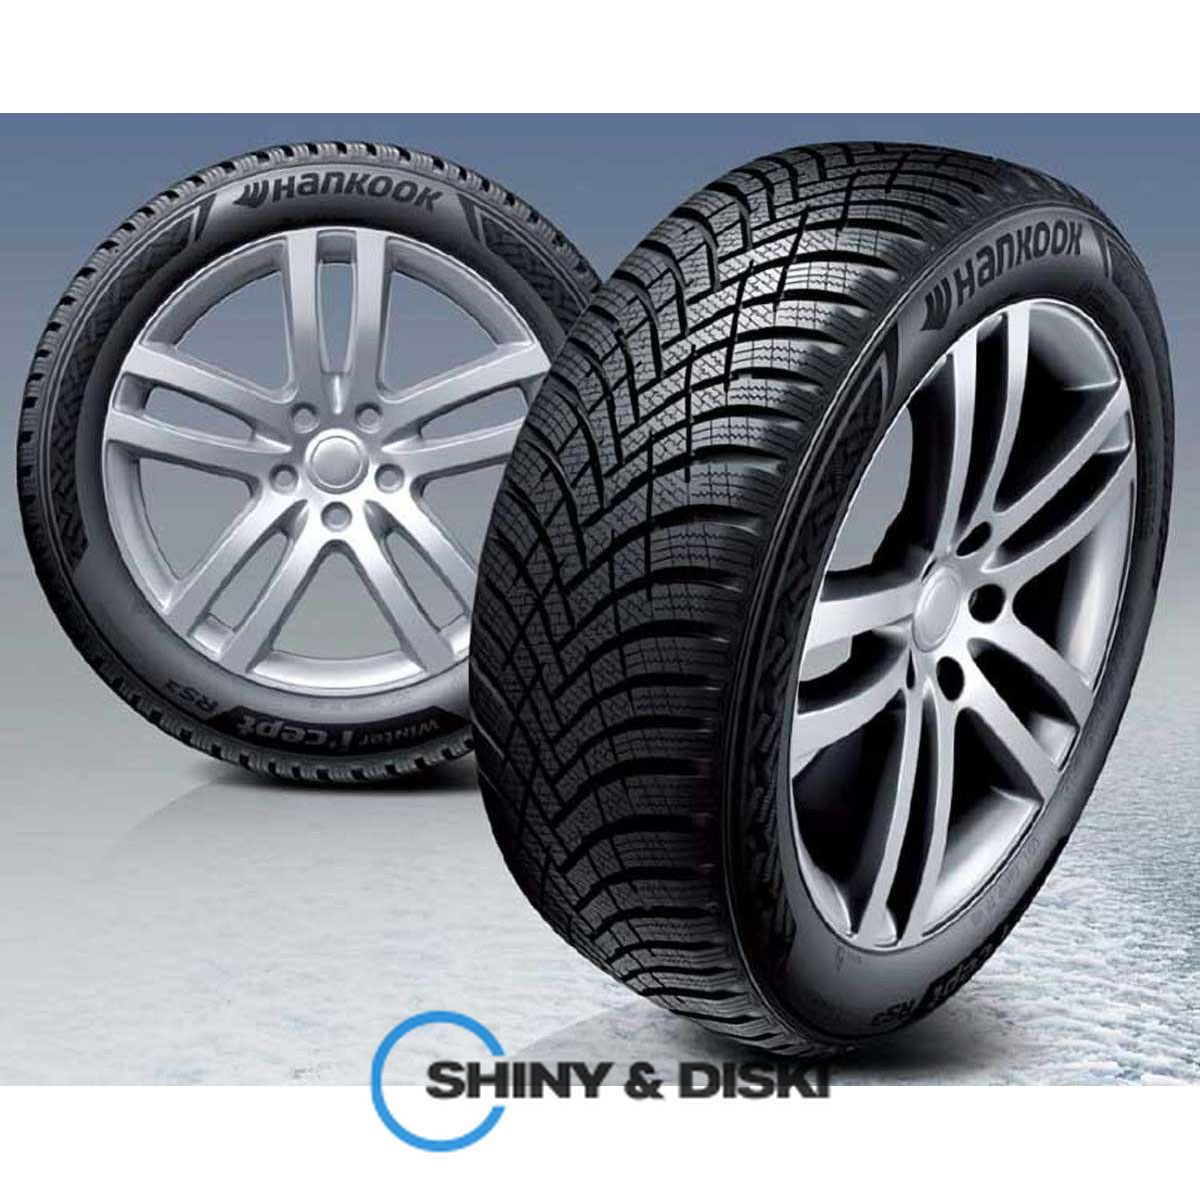 покрышки hankook winter i*cept rs3 w462 185/50 r16 81h